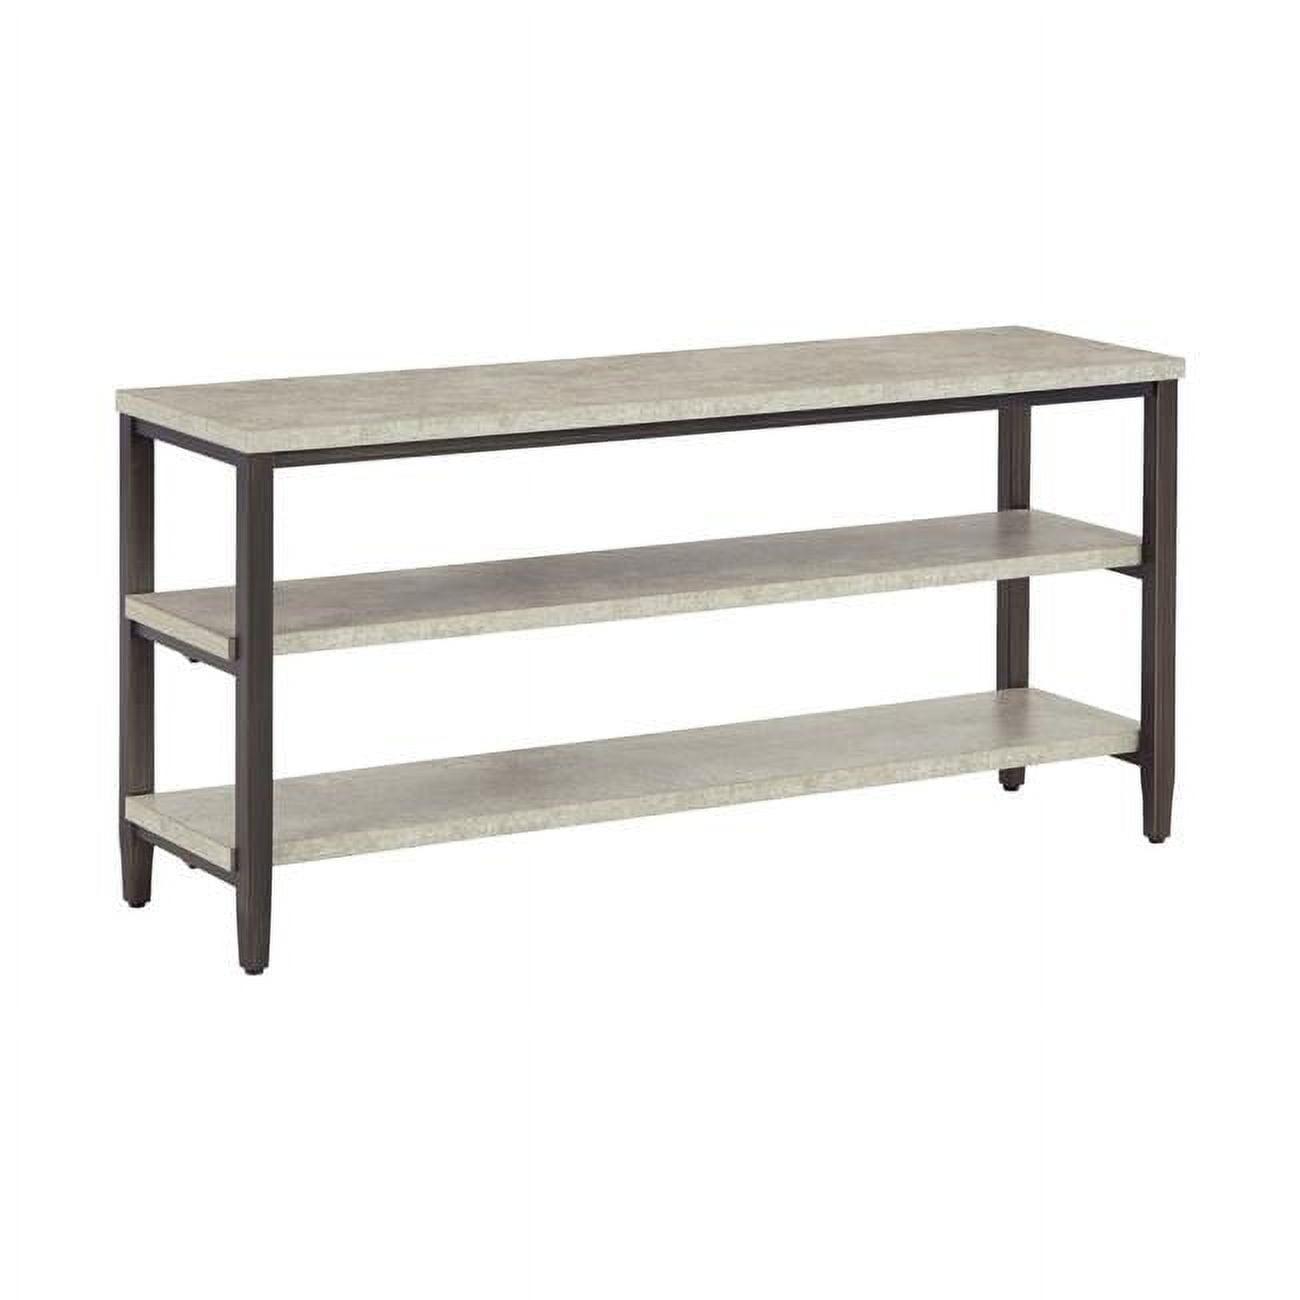 Effervescent 52" Faux Concrete & Metal Console Table with Storage